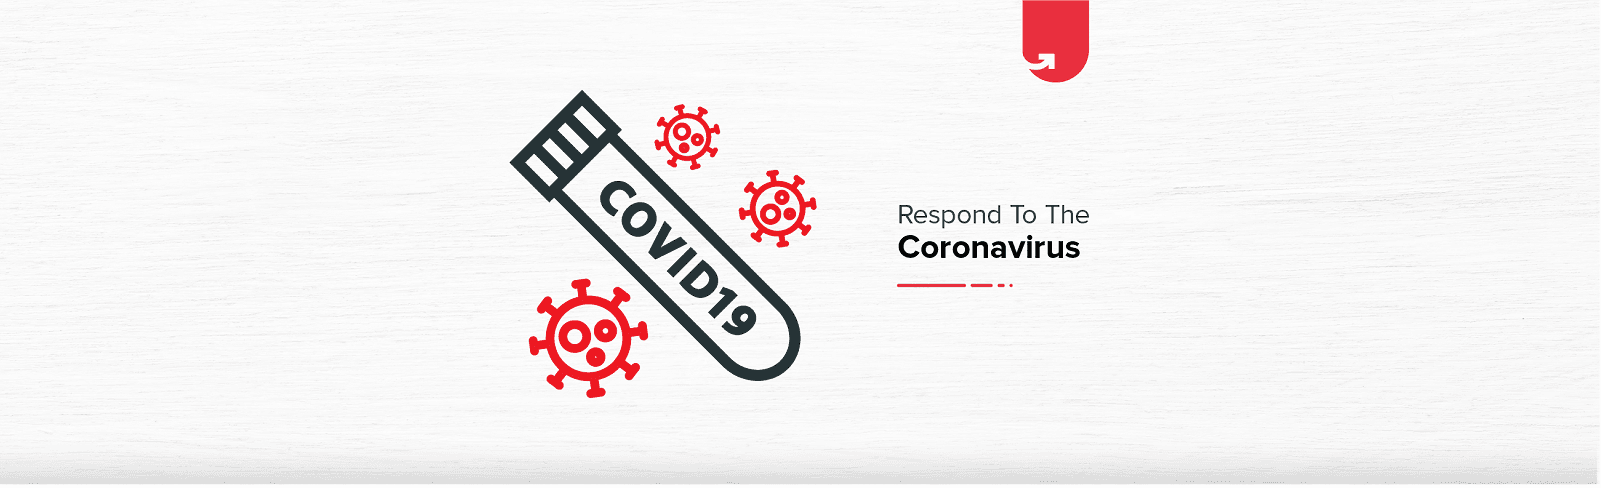 Role of Machine Learning Methods for Coronavirus Aid: Everything You Need to Know